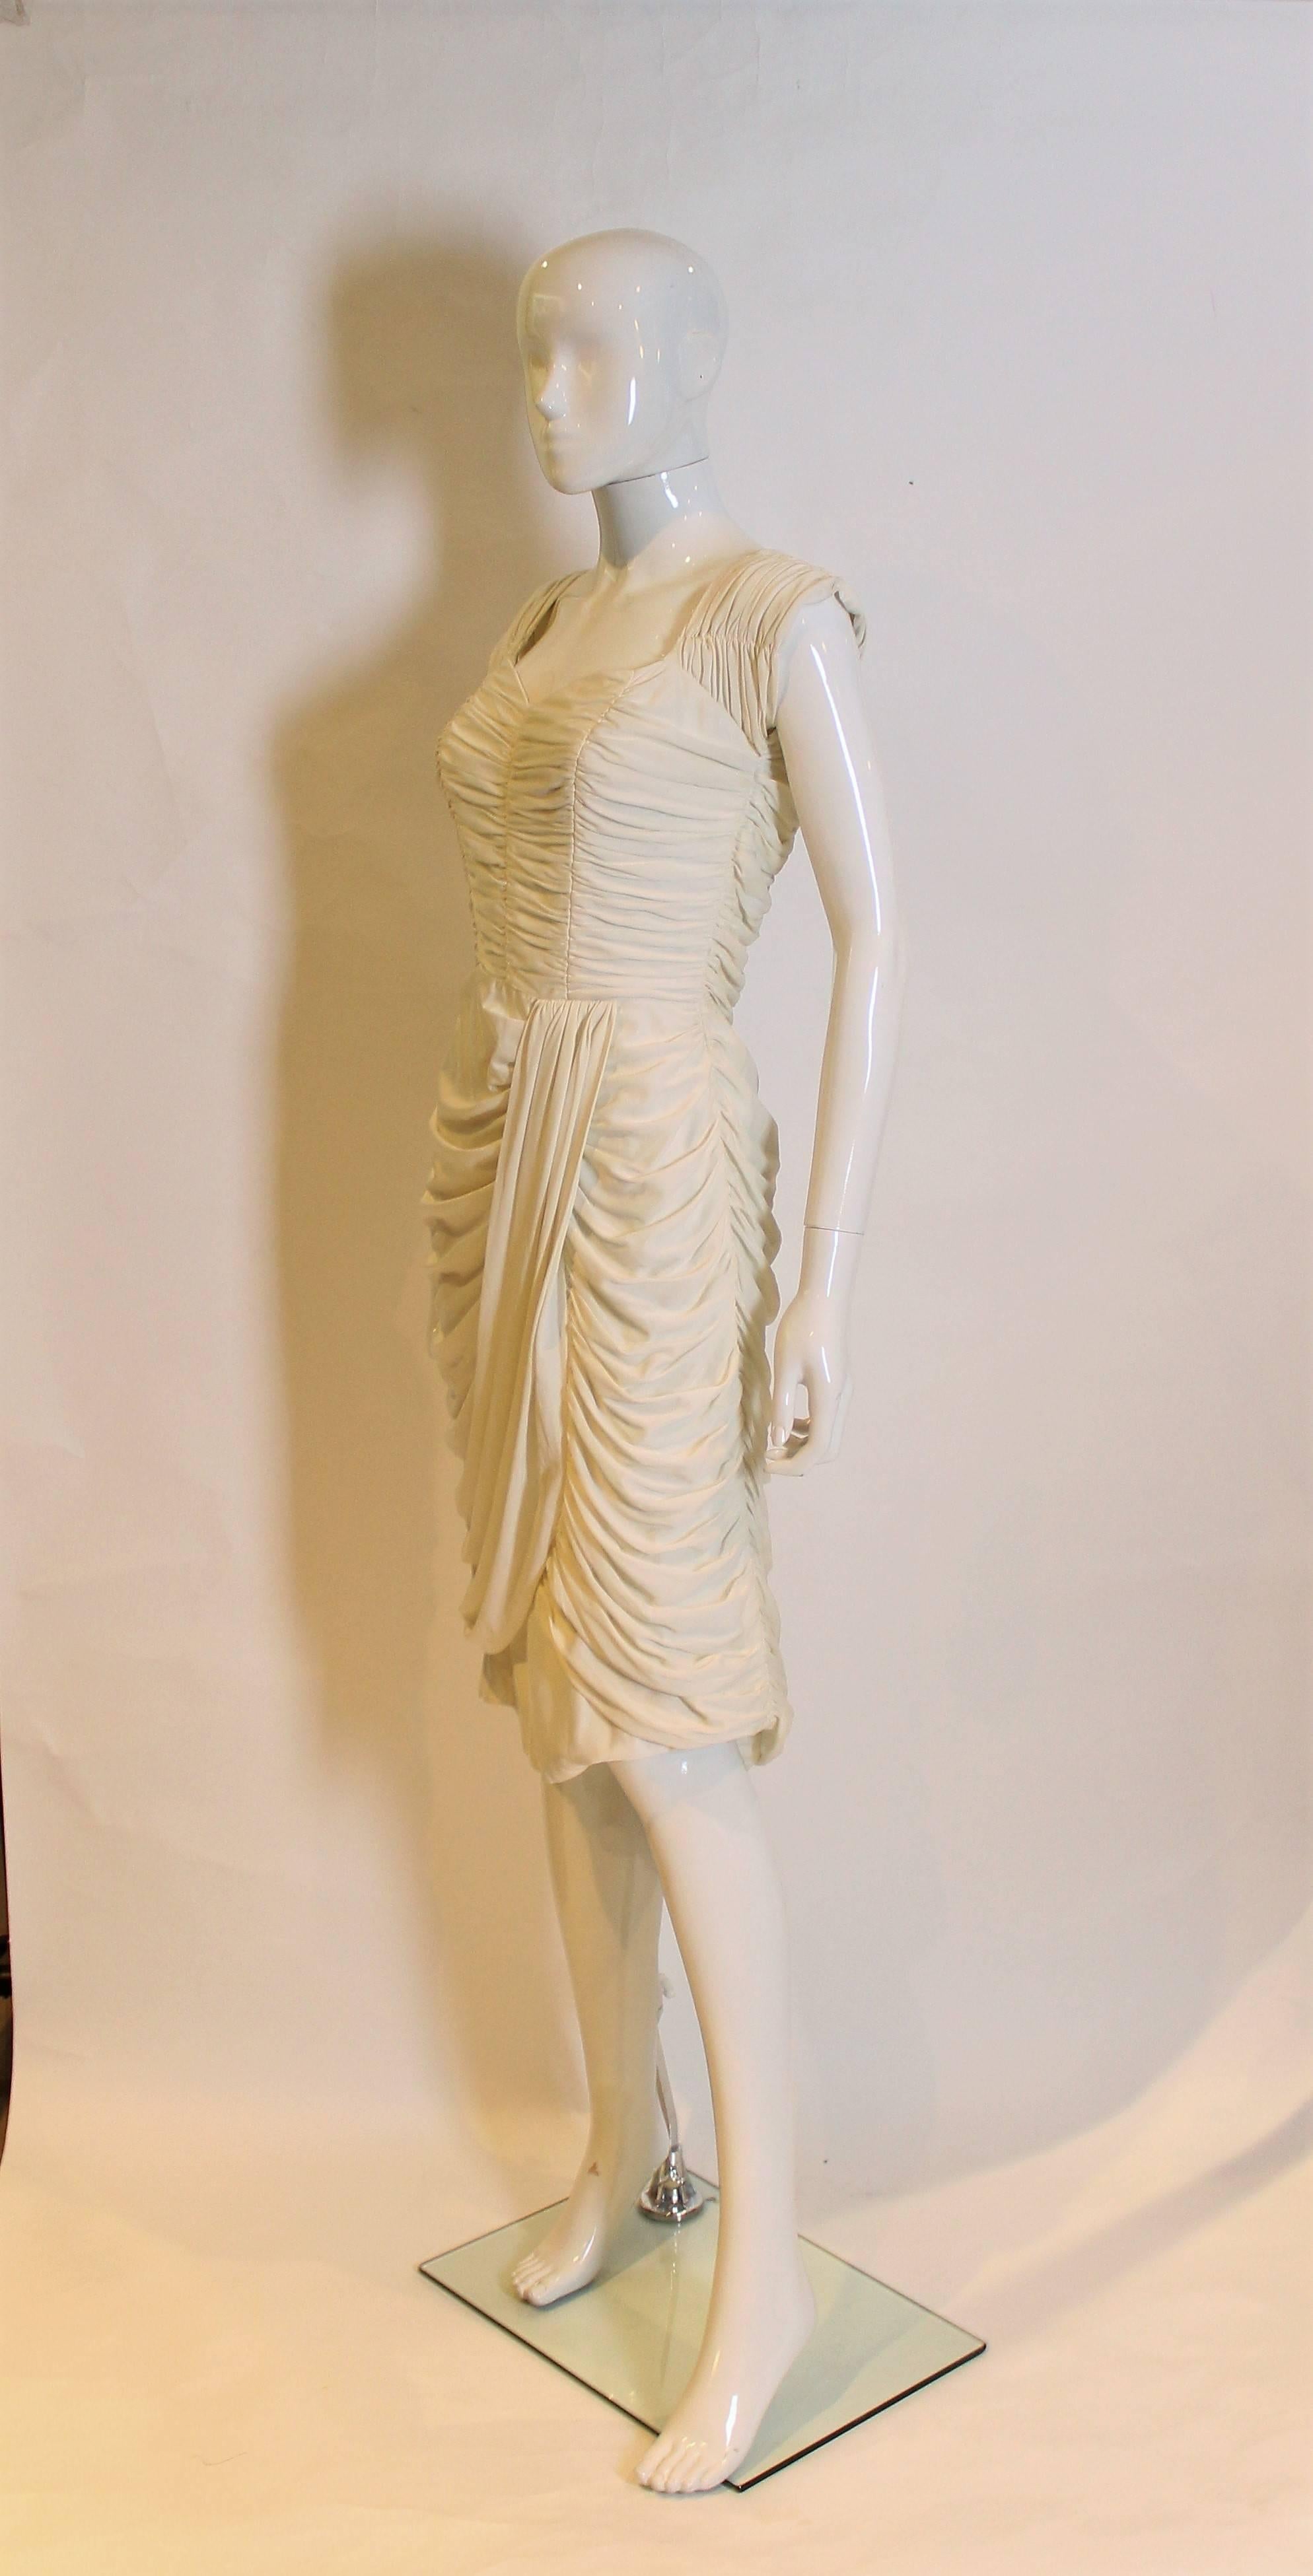 A white cocktail dress with gathiering and folds, a possible wedding dress?
The dress has a sweetheart neckline, foldover skirt,  central back zip and is fully lined.